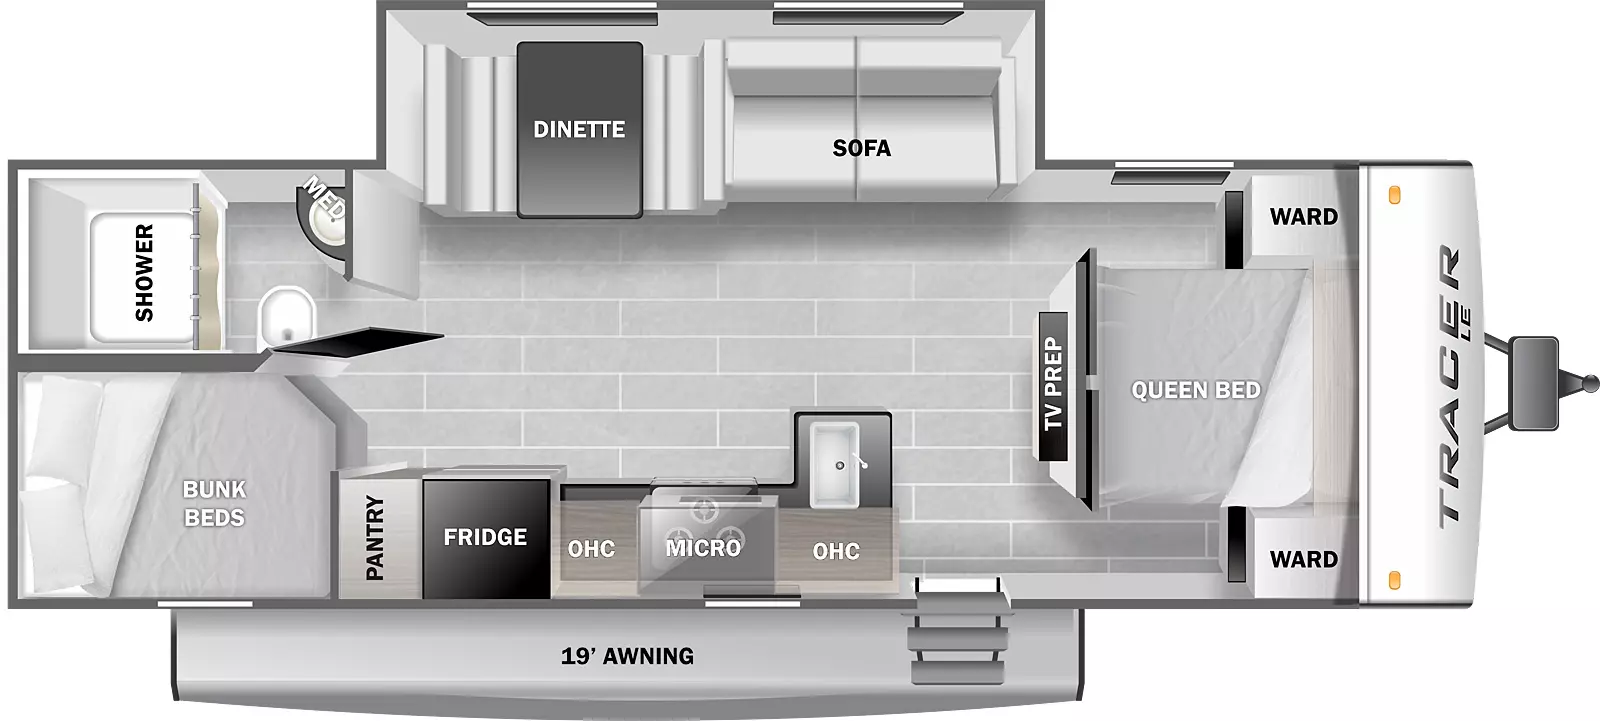 The Tracer LE 260BHSLE-DSO floorplan has one entry door, a 19 foot power awning, and one slideout. The entry door leads to the living area on the left and the bedroom on the right. Directly to the left of the entry door is an L-shaped counter top with a sink and stove. A microwave is above the stove. Overhead storage is above the countertop to the right and left of the microwave. To the left of he countertop are a refrigerator and a pantry. Bunk beds are in the rear door side corner of the RV. The rear off door corner has a door leading to the bathroom. The bathroom has a toilet, shower, and sink with a medicine cabinet above. The living area slideout is on the off door side and has a dinette and sofa. The front wall of the living area has a countertop and sliding doors on the left and right. The sliding doors both lead to the bedroom. The bedroom has a queen bed with a wardrobe and night stand on the right and left and overhead storage above.